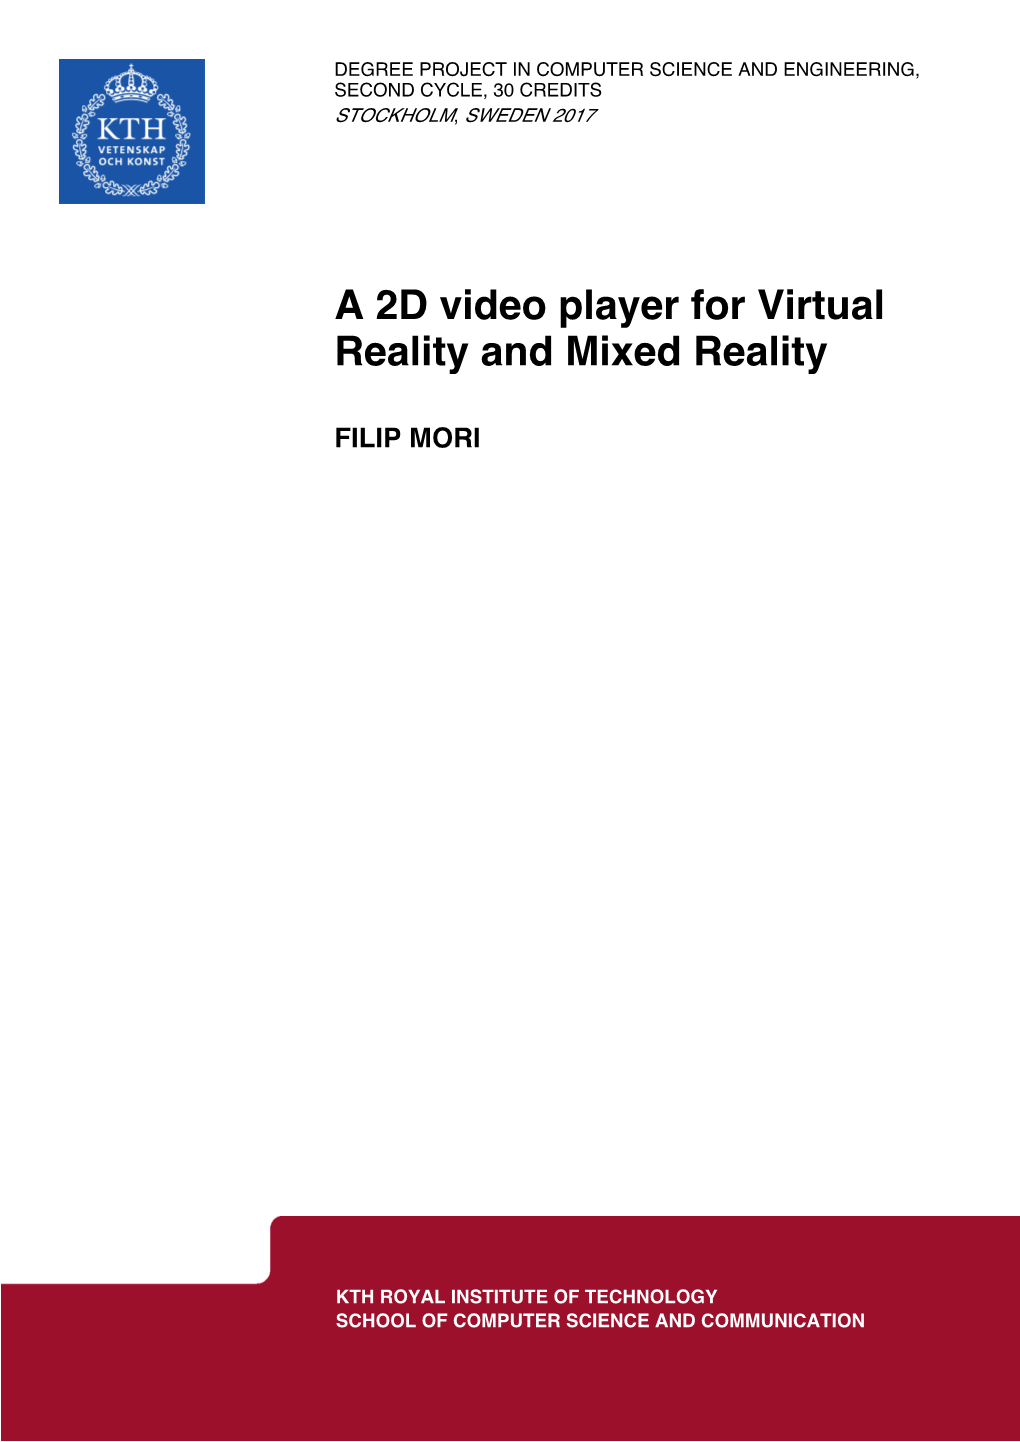 A 2D Video Player for Virtual Reality and Mixed Reality